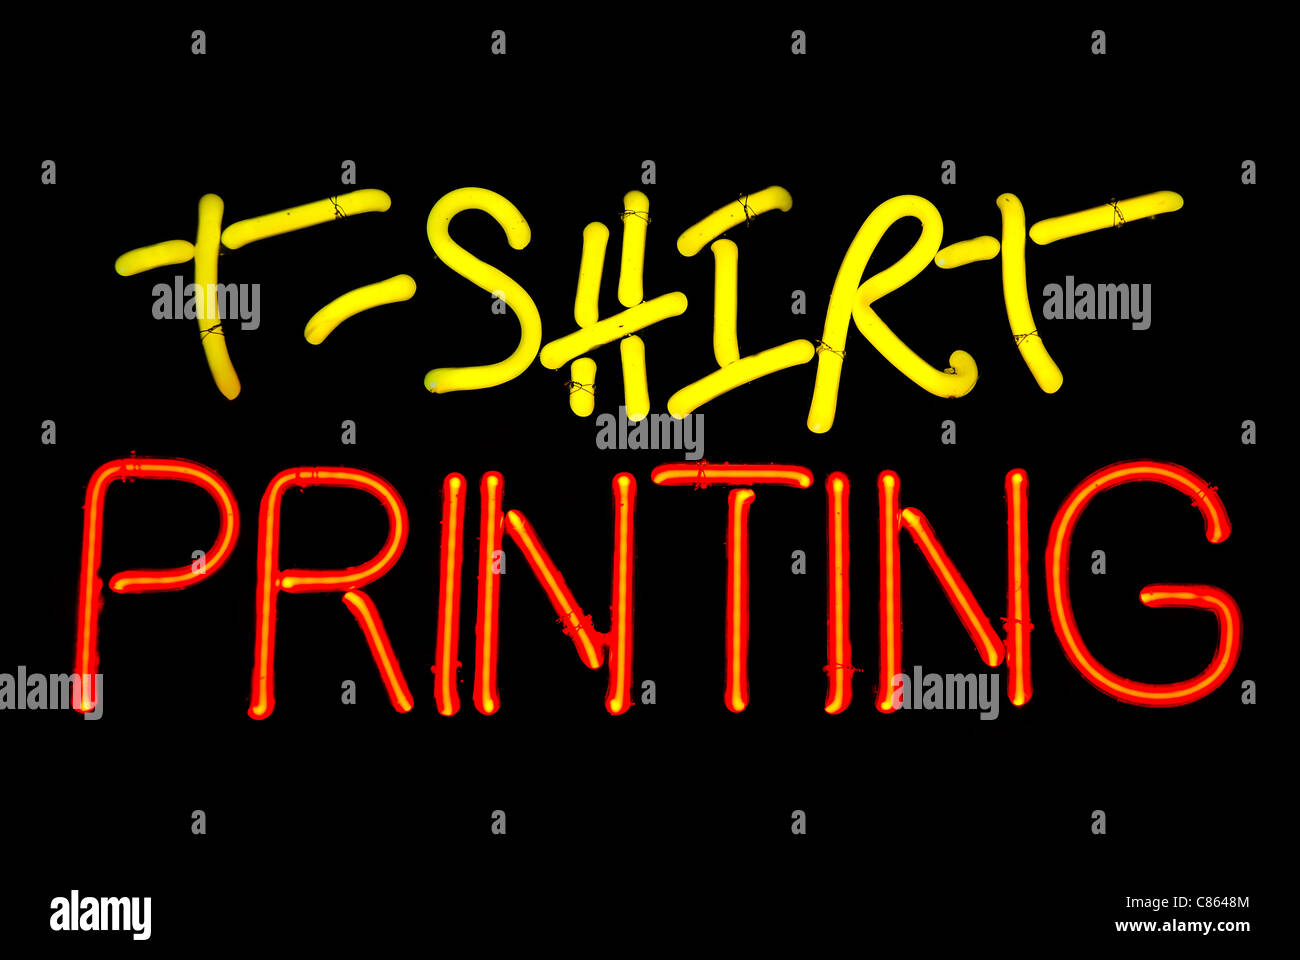 Tshirt printing neon sign isolated on black background Stock Photo